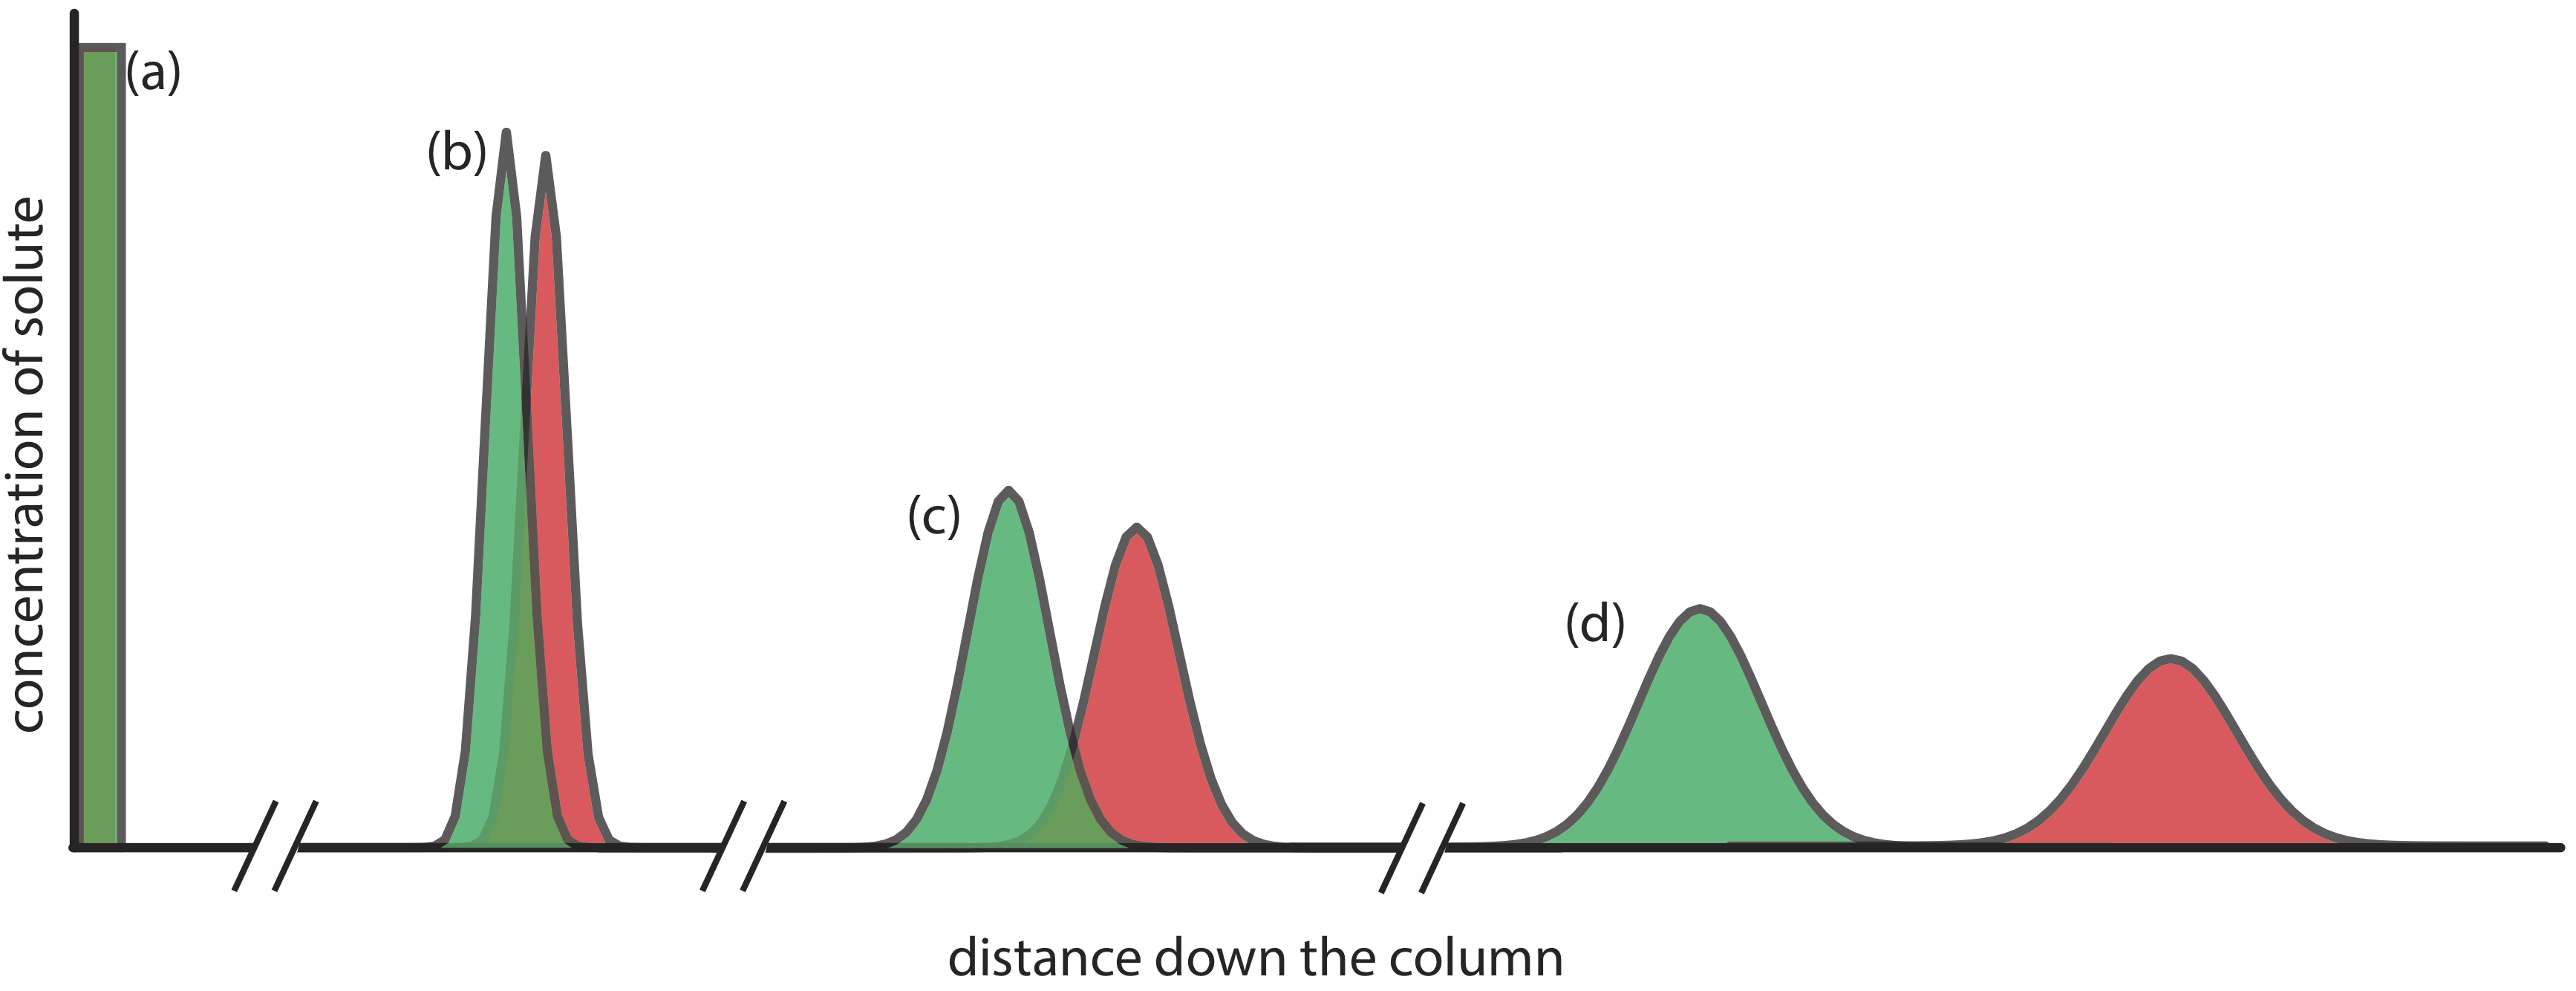 The initial injection of a sample results in the rectangular band of solutes seen in (a). As the sample migrates through the column, the individual components of the sample take on a Gaussian-shaped band profile, as seen in (b-d).